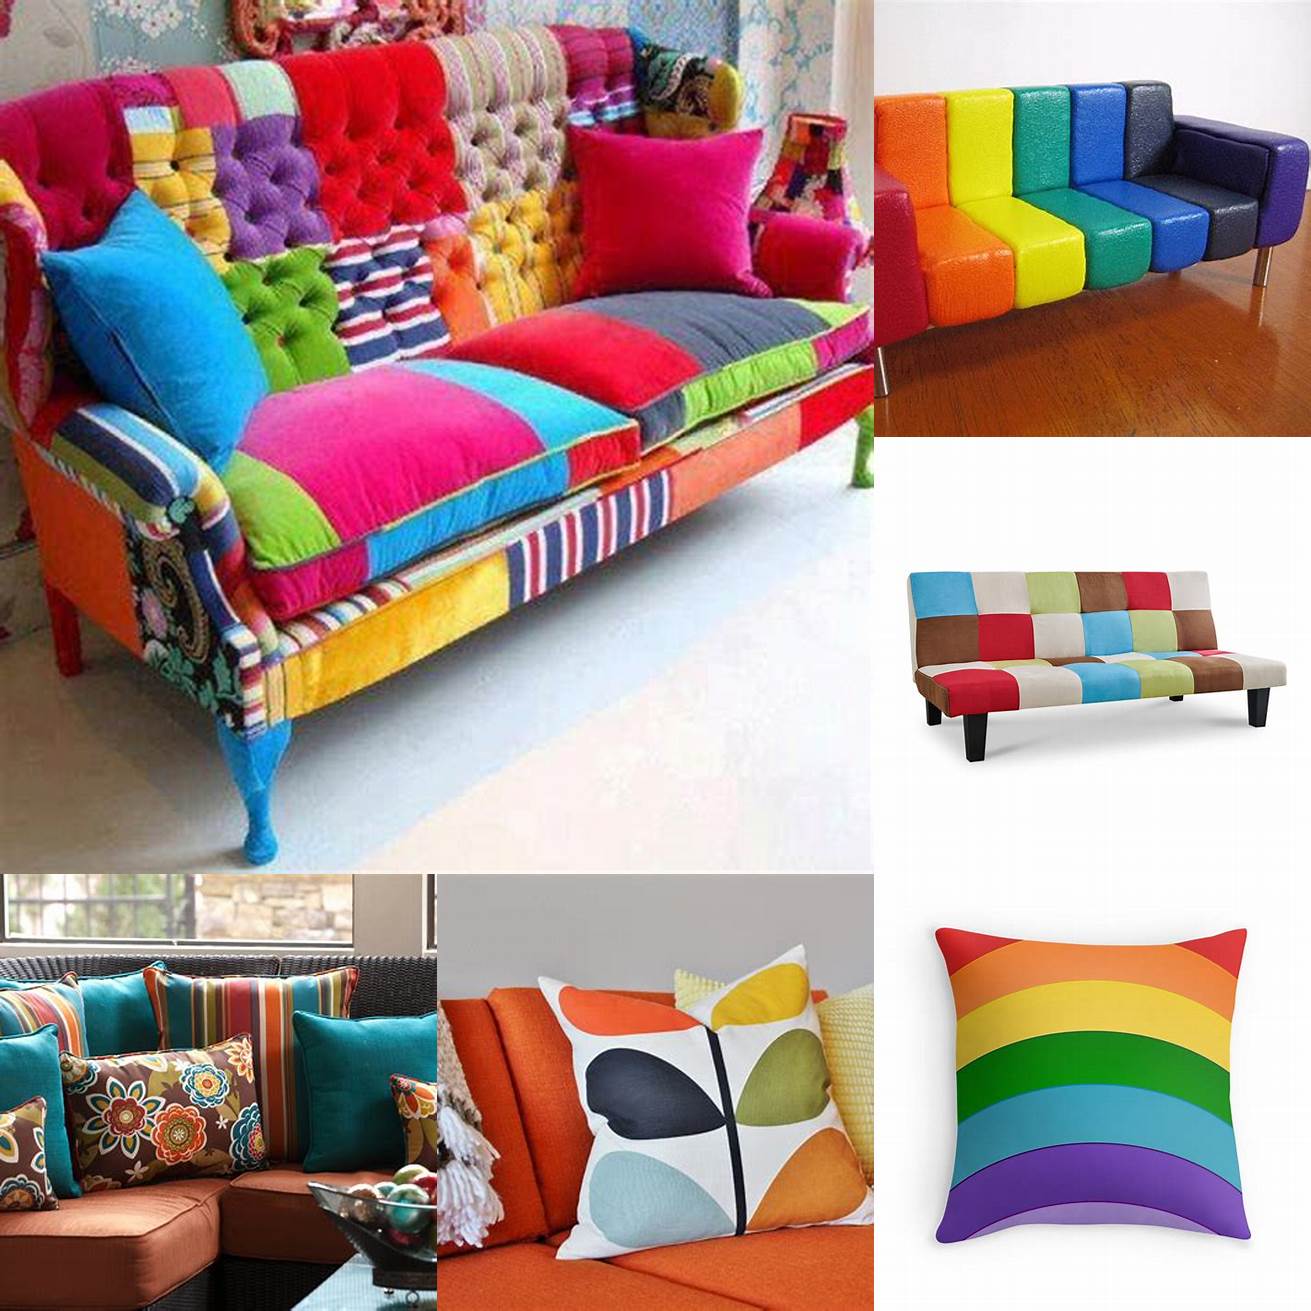 Add a touch of color to your couch with Rainbow Furnitures throw pillows